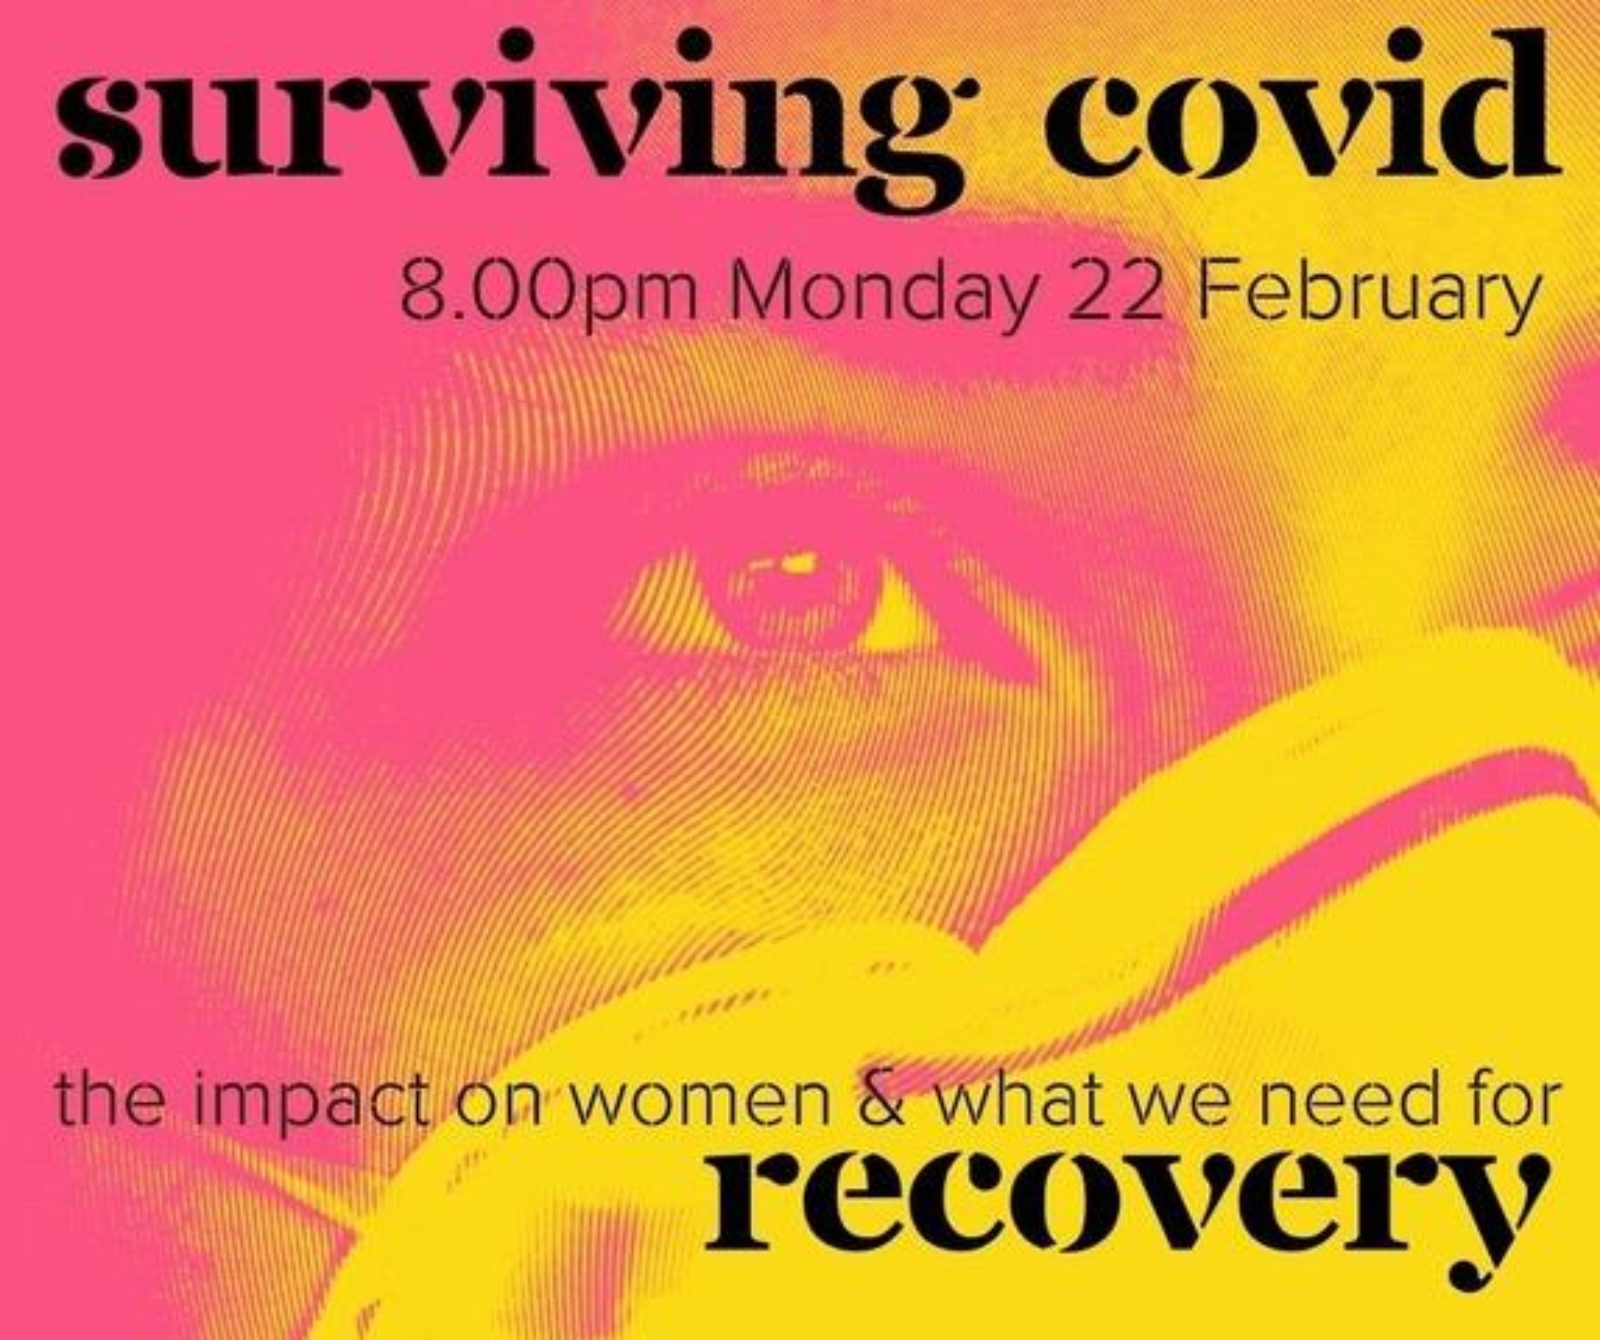 Surviving Covid poster